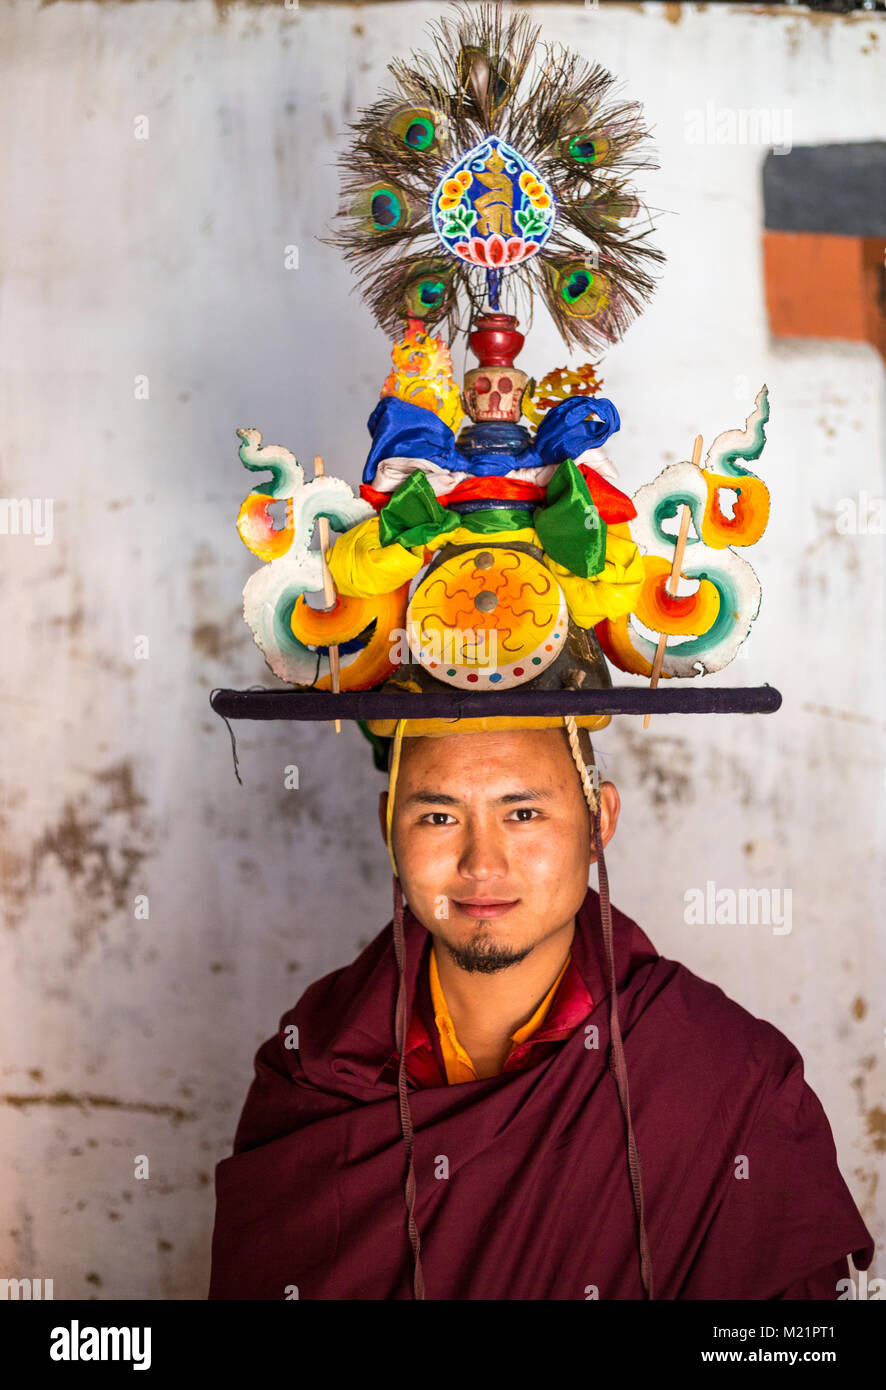 Prakhar Lhakhang, Bumthang, Bhutan.  Young Monk Posing with his Headpiece before a Dance. Stock Photo